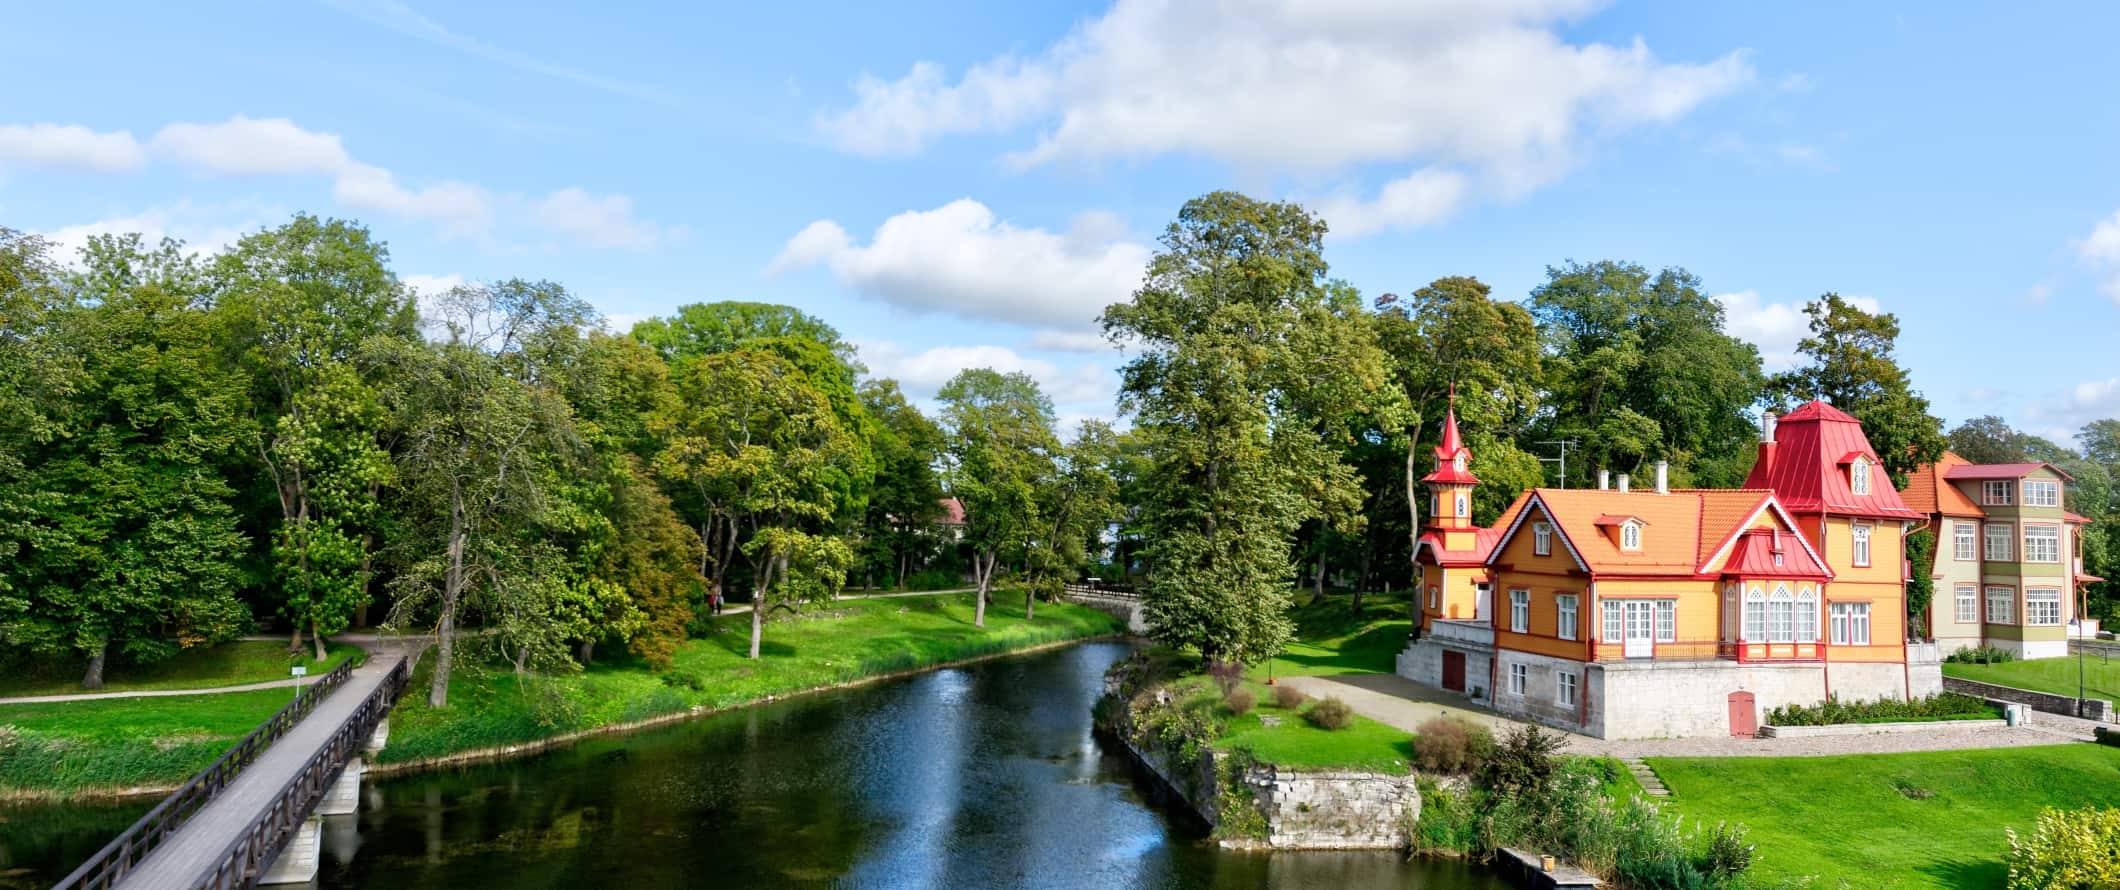 Brightly colored building along a tree-lined canal in the countryside of Estonia